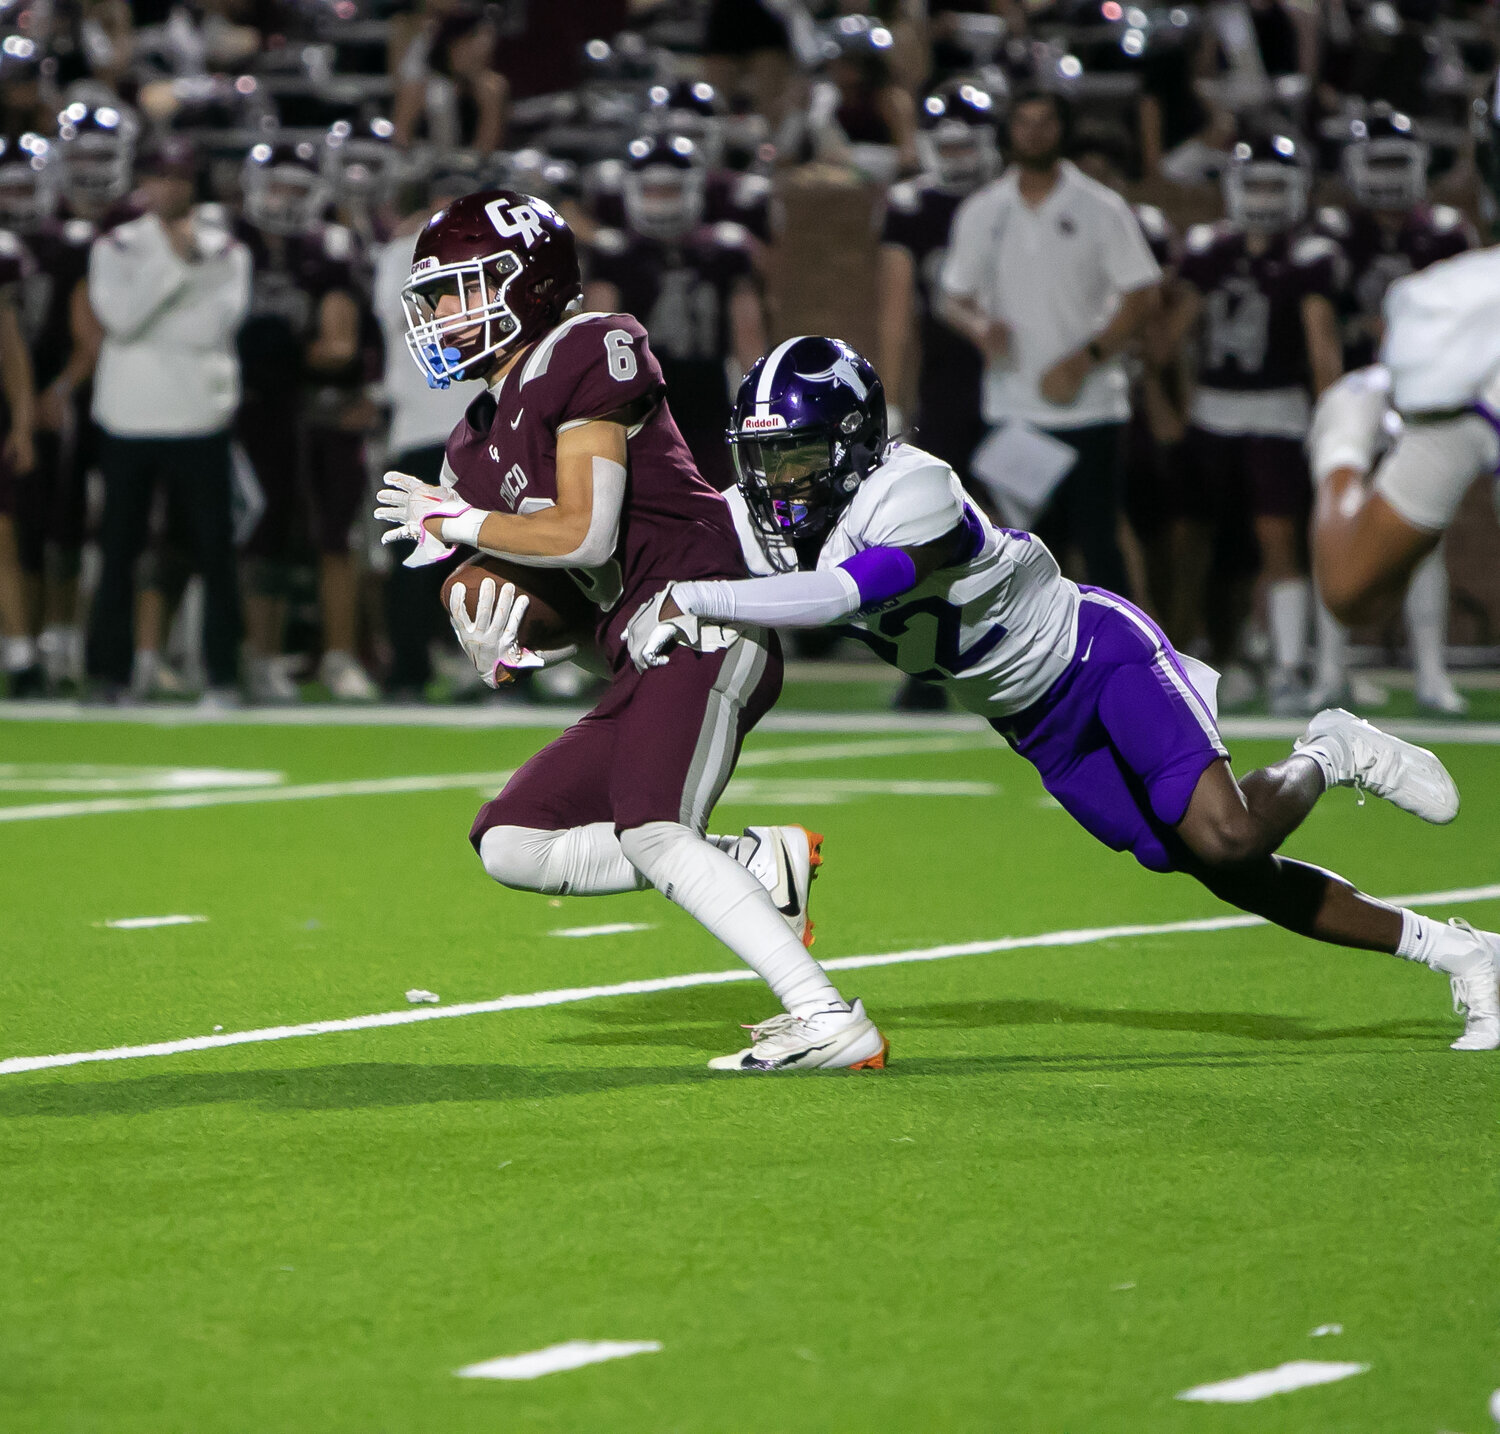 Scott Eckel turns upfield after catching a pass during Friday's District 19-6A game between Cinco Ranch and Morton Ranch on Friday at Rhodes Stadium.